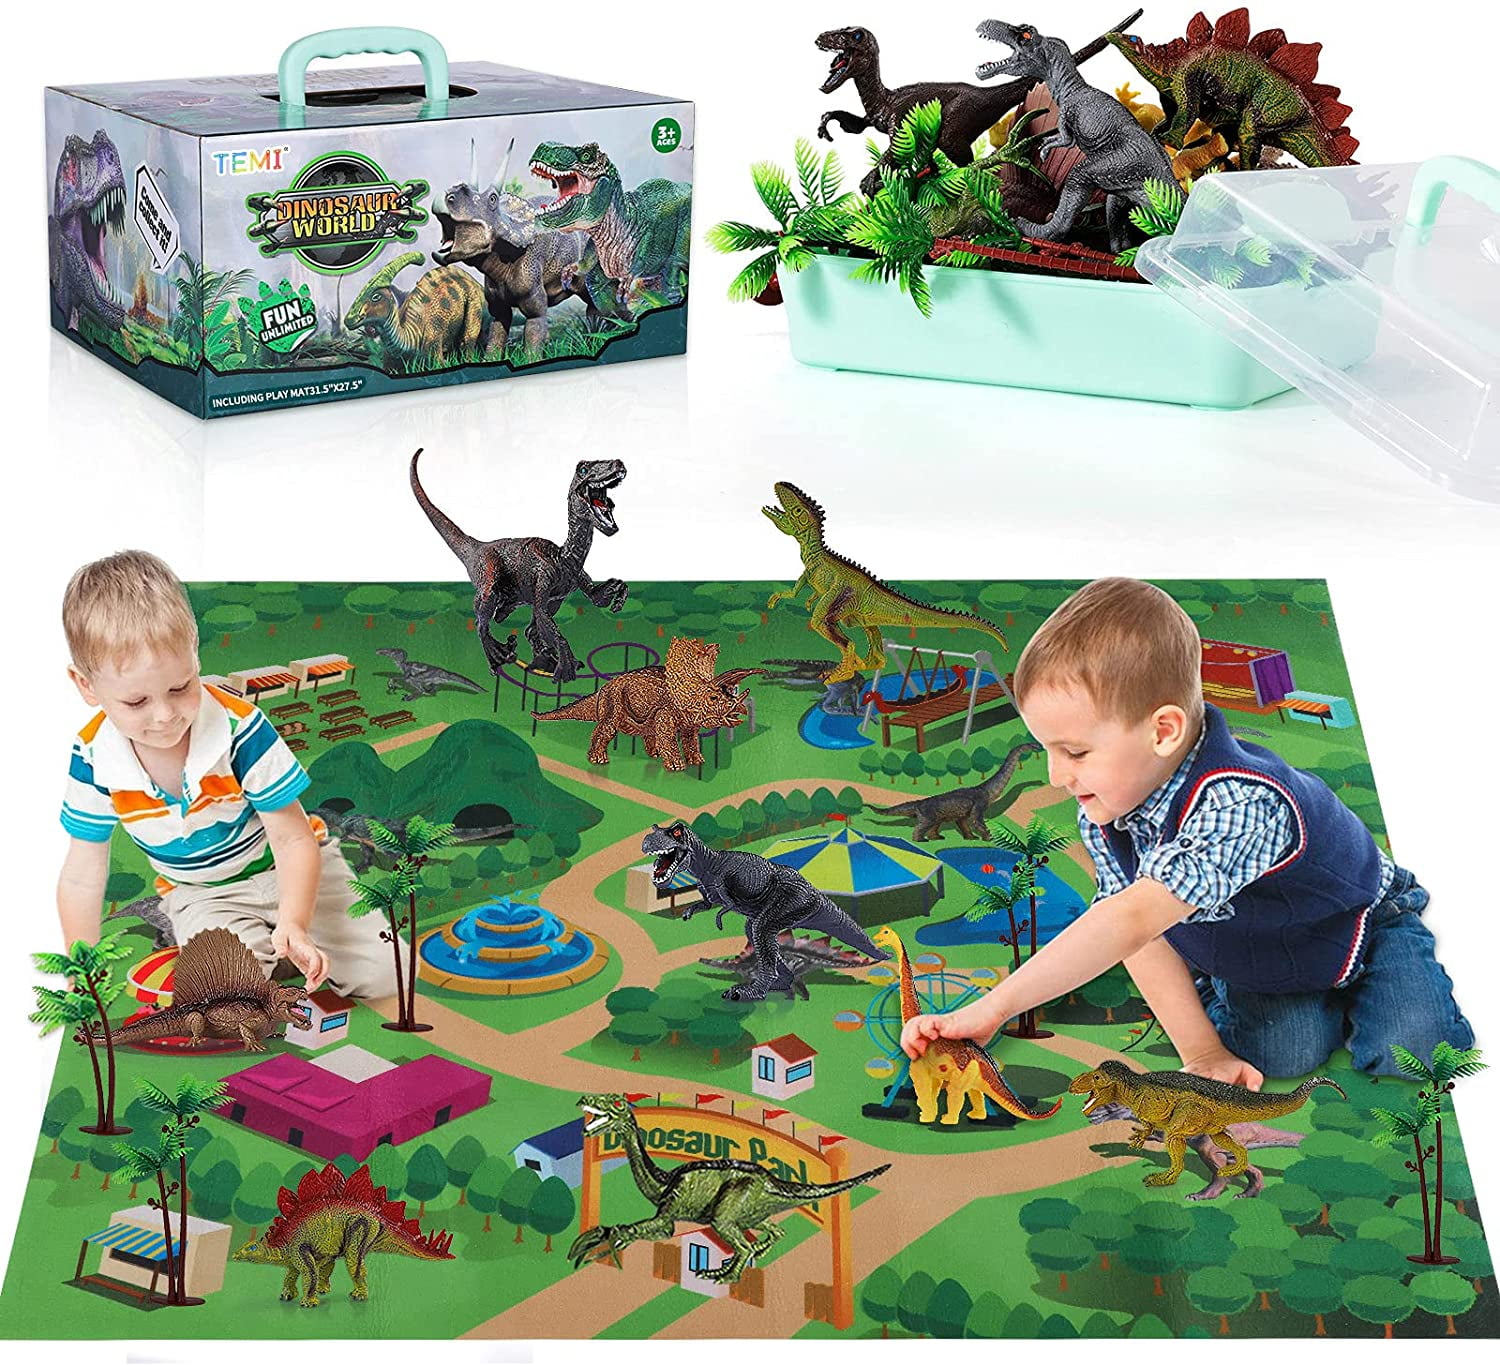 15 NEW TOY DINOSAURS KIDS PLAYSET 2" SIZE DINOSAUR FIGURES DINO PARTY FAVORS 